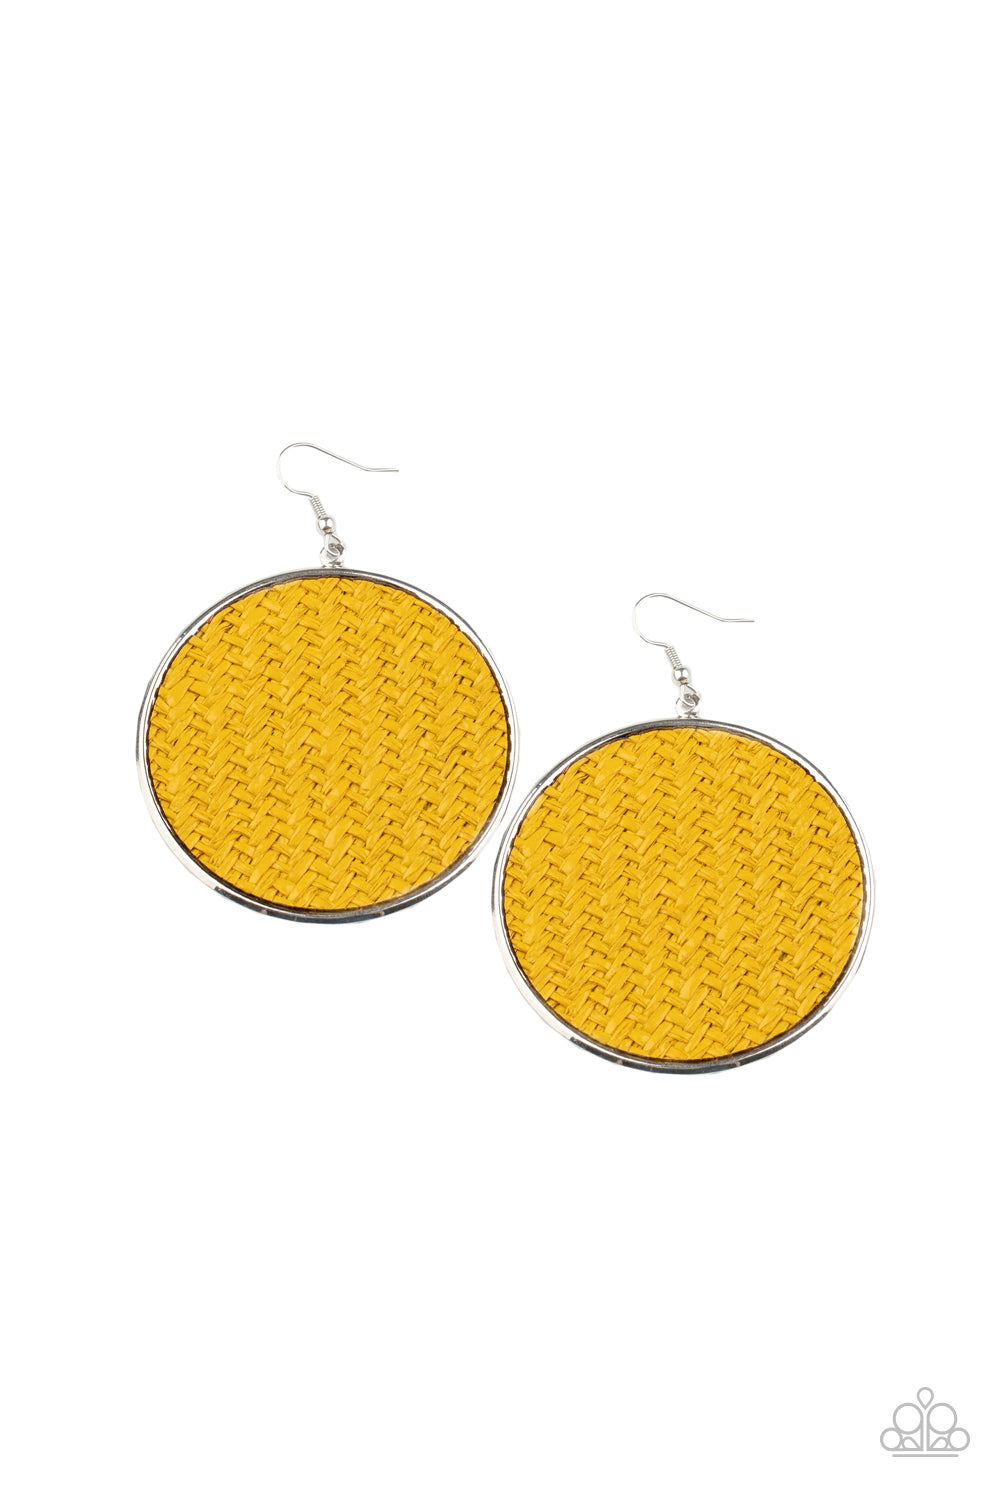 shop-sassy-affordable- wonderfully-woven-yellow-paparazzi-accessories